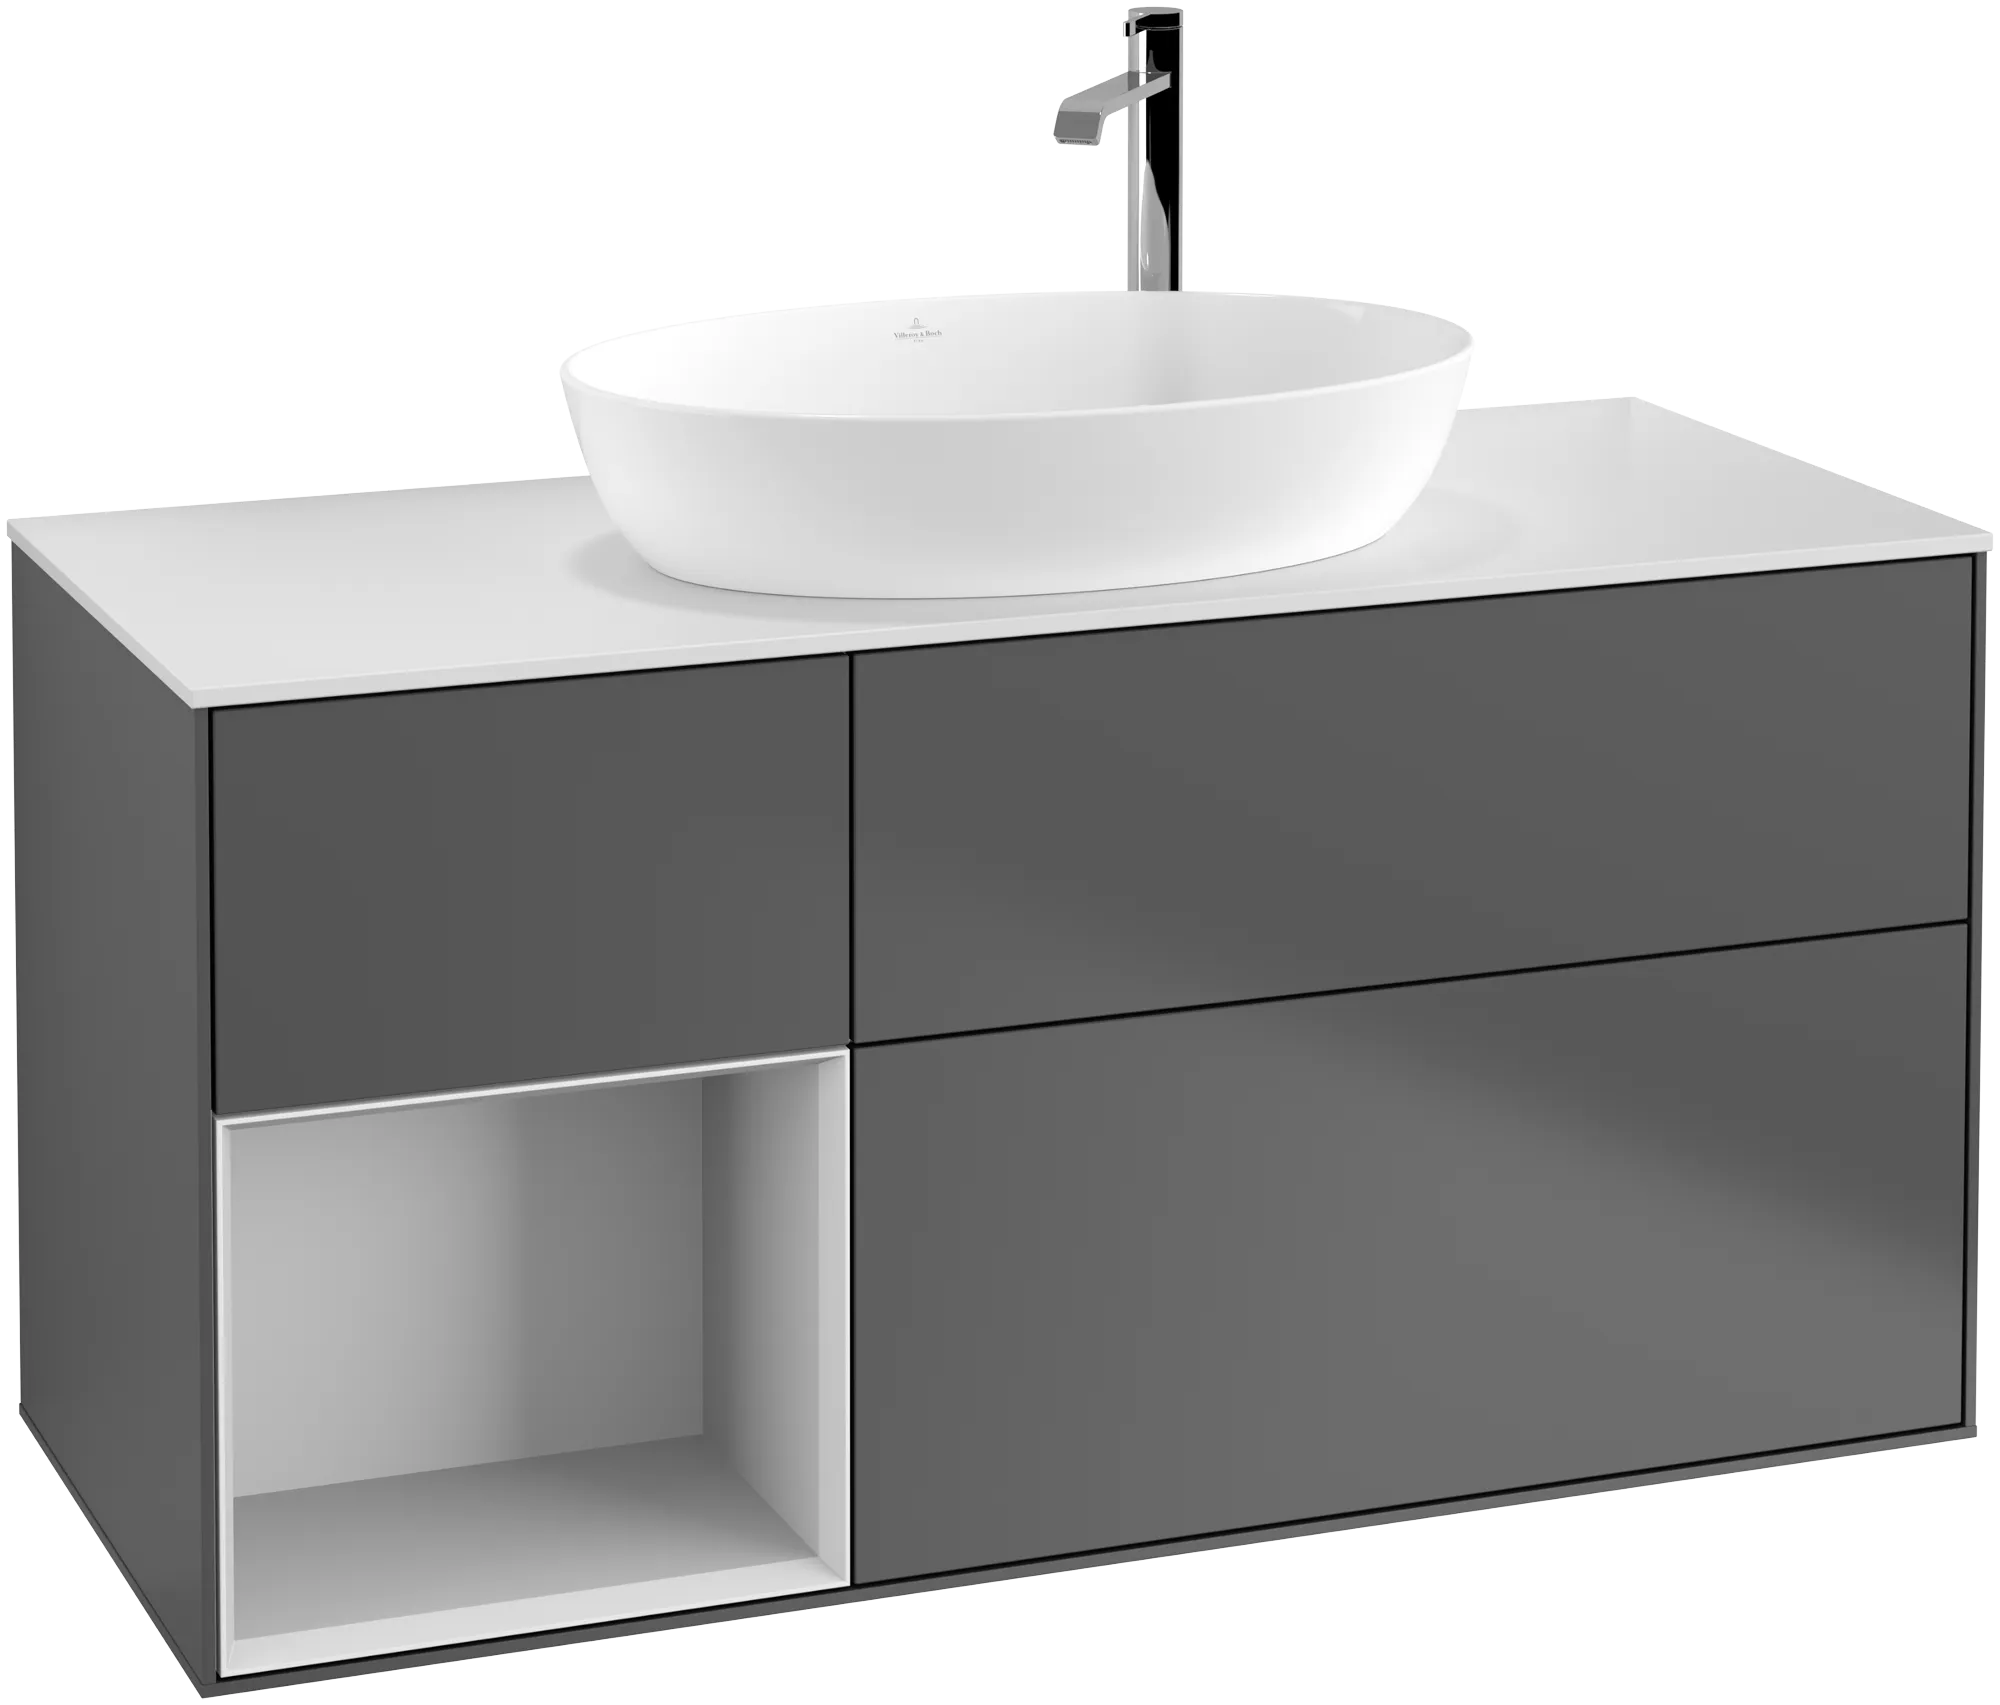 Picture of VILLEROY BOCH Finion Vanity unit, with lighting, 3 pull-out compartments, 1200 x 603 x 501 mm, Anthracite Matt Lacquer / White Matt Lacquer / Glass White Matt #G941MTGK